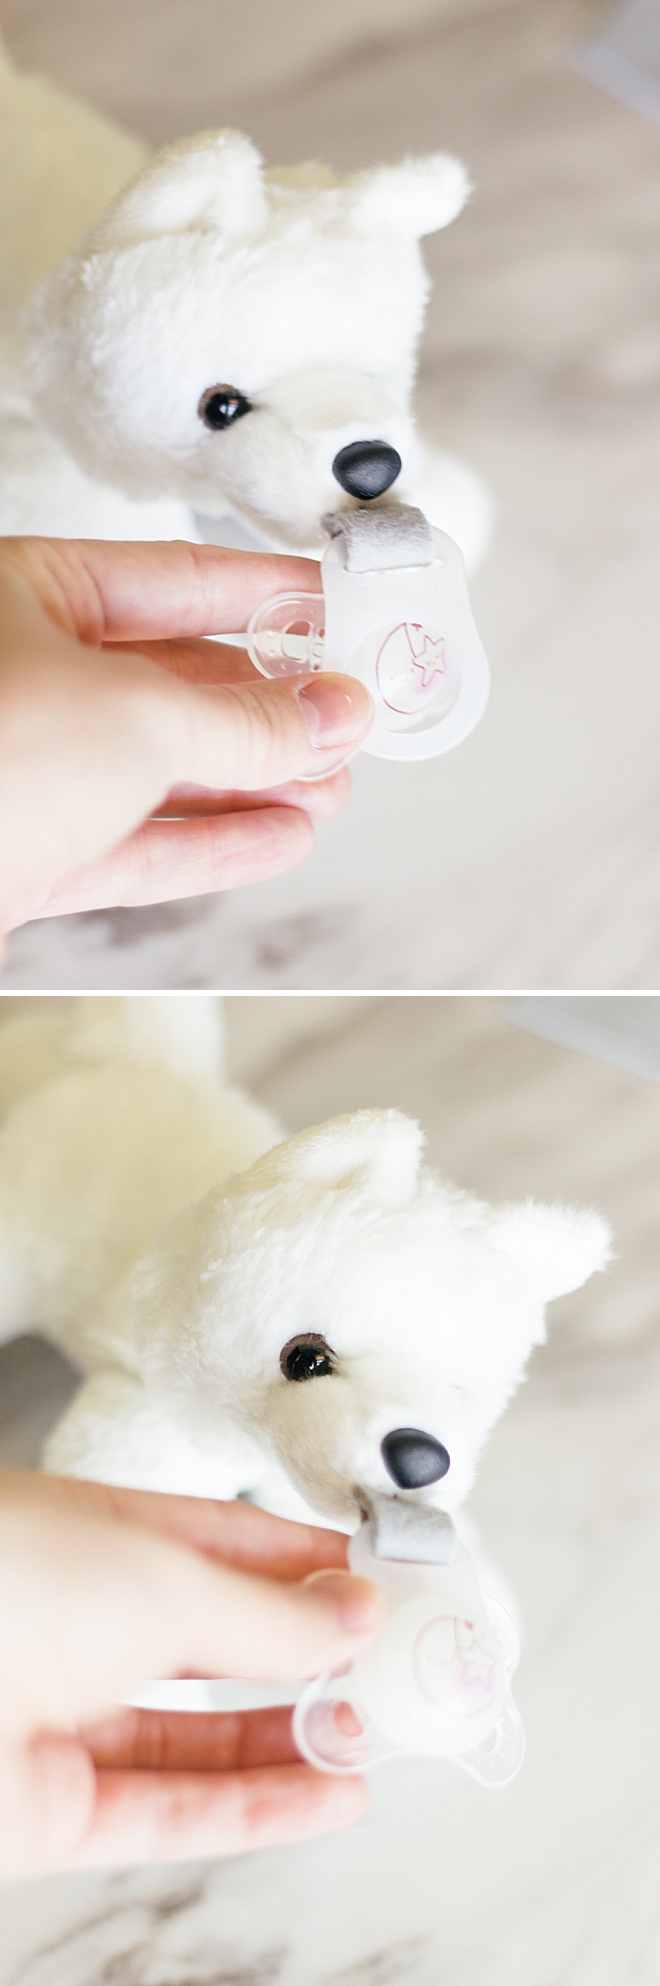 Make your own stuffed animal pacifier holder with your babies favorite pacifier!